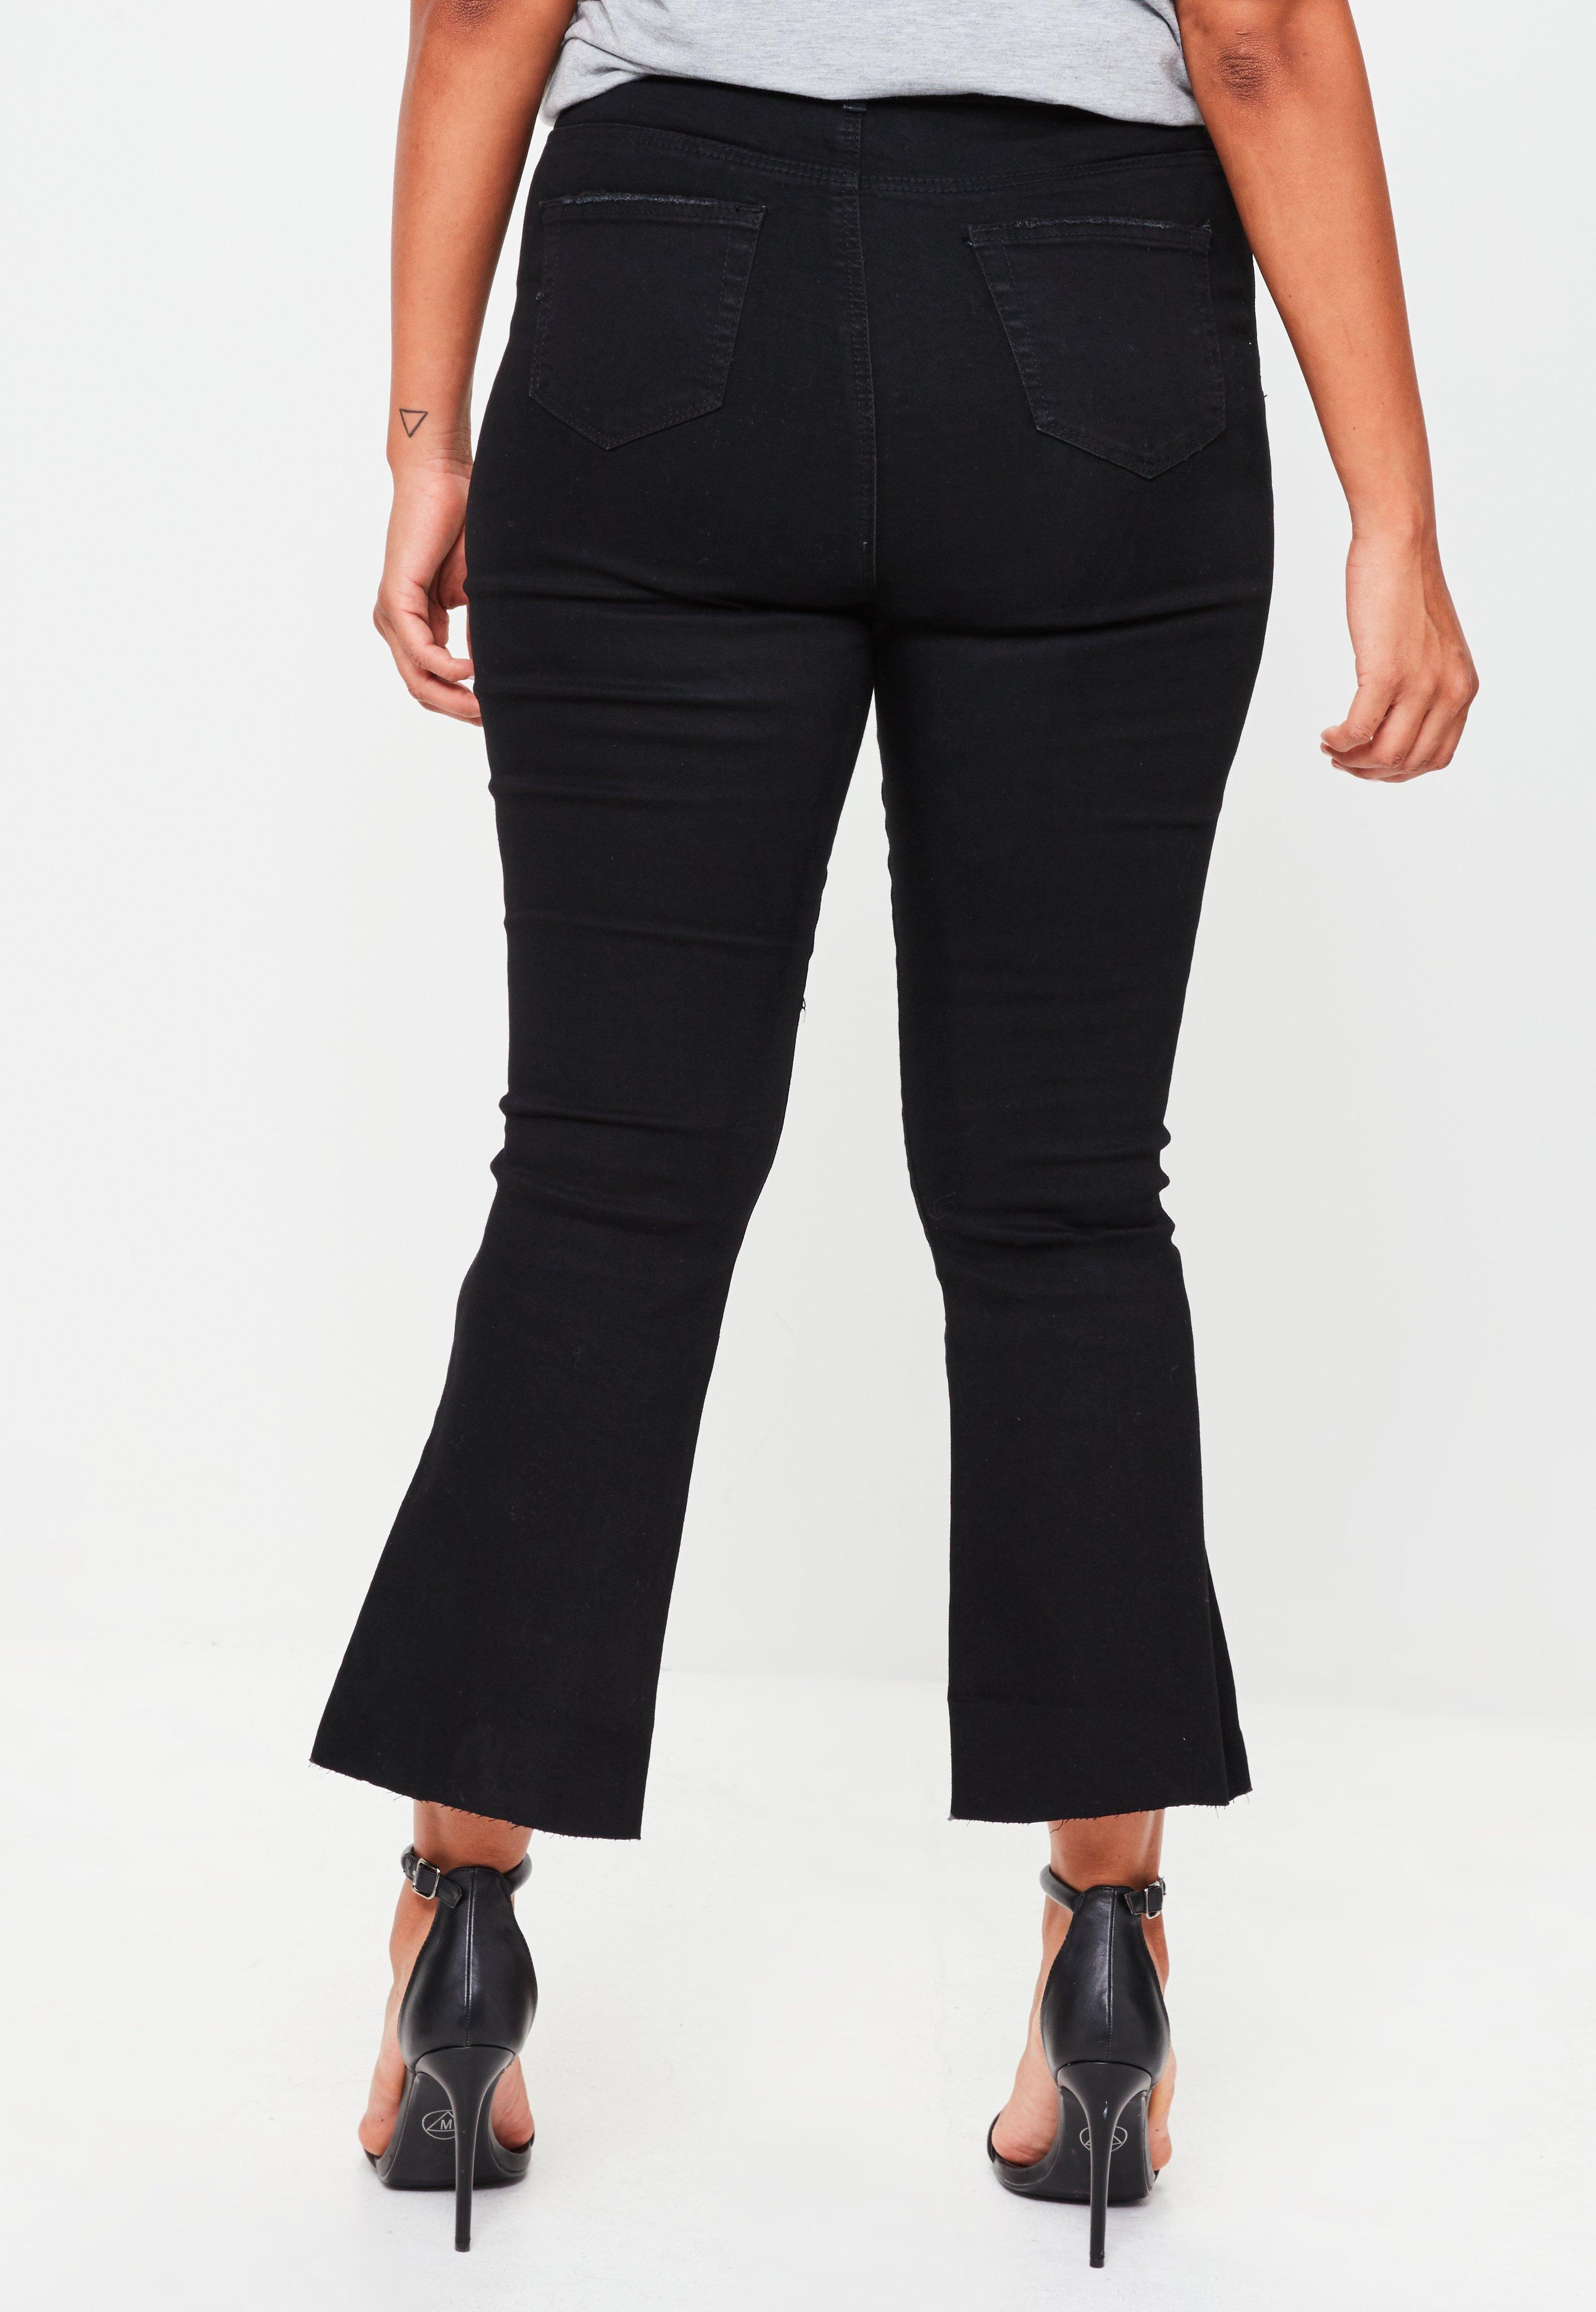 Lyst - Missguided Plus Size Black Cropped Kick Flare Jeans in Black